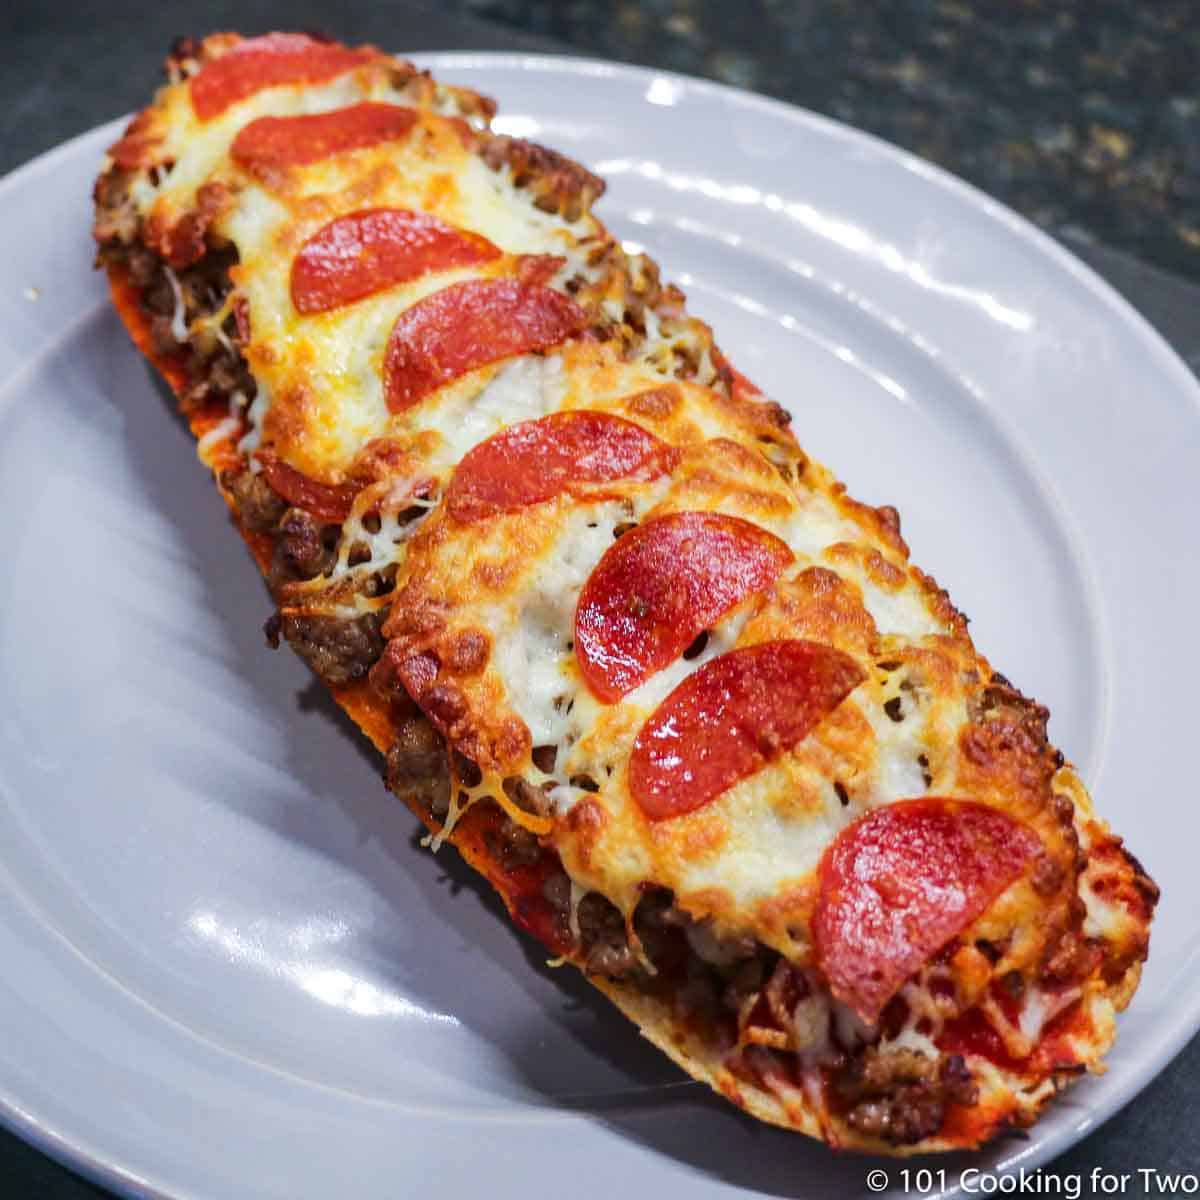 https://www.101cookingfortwo.com/wp-content/uploads/2015/11/Quick-French-Bread-Pizza-3b.jpg